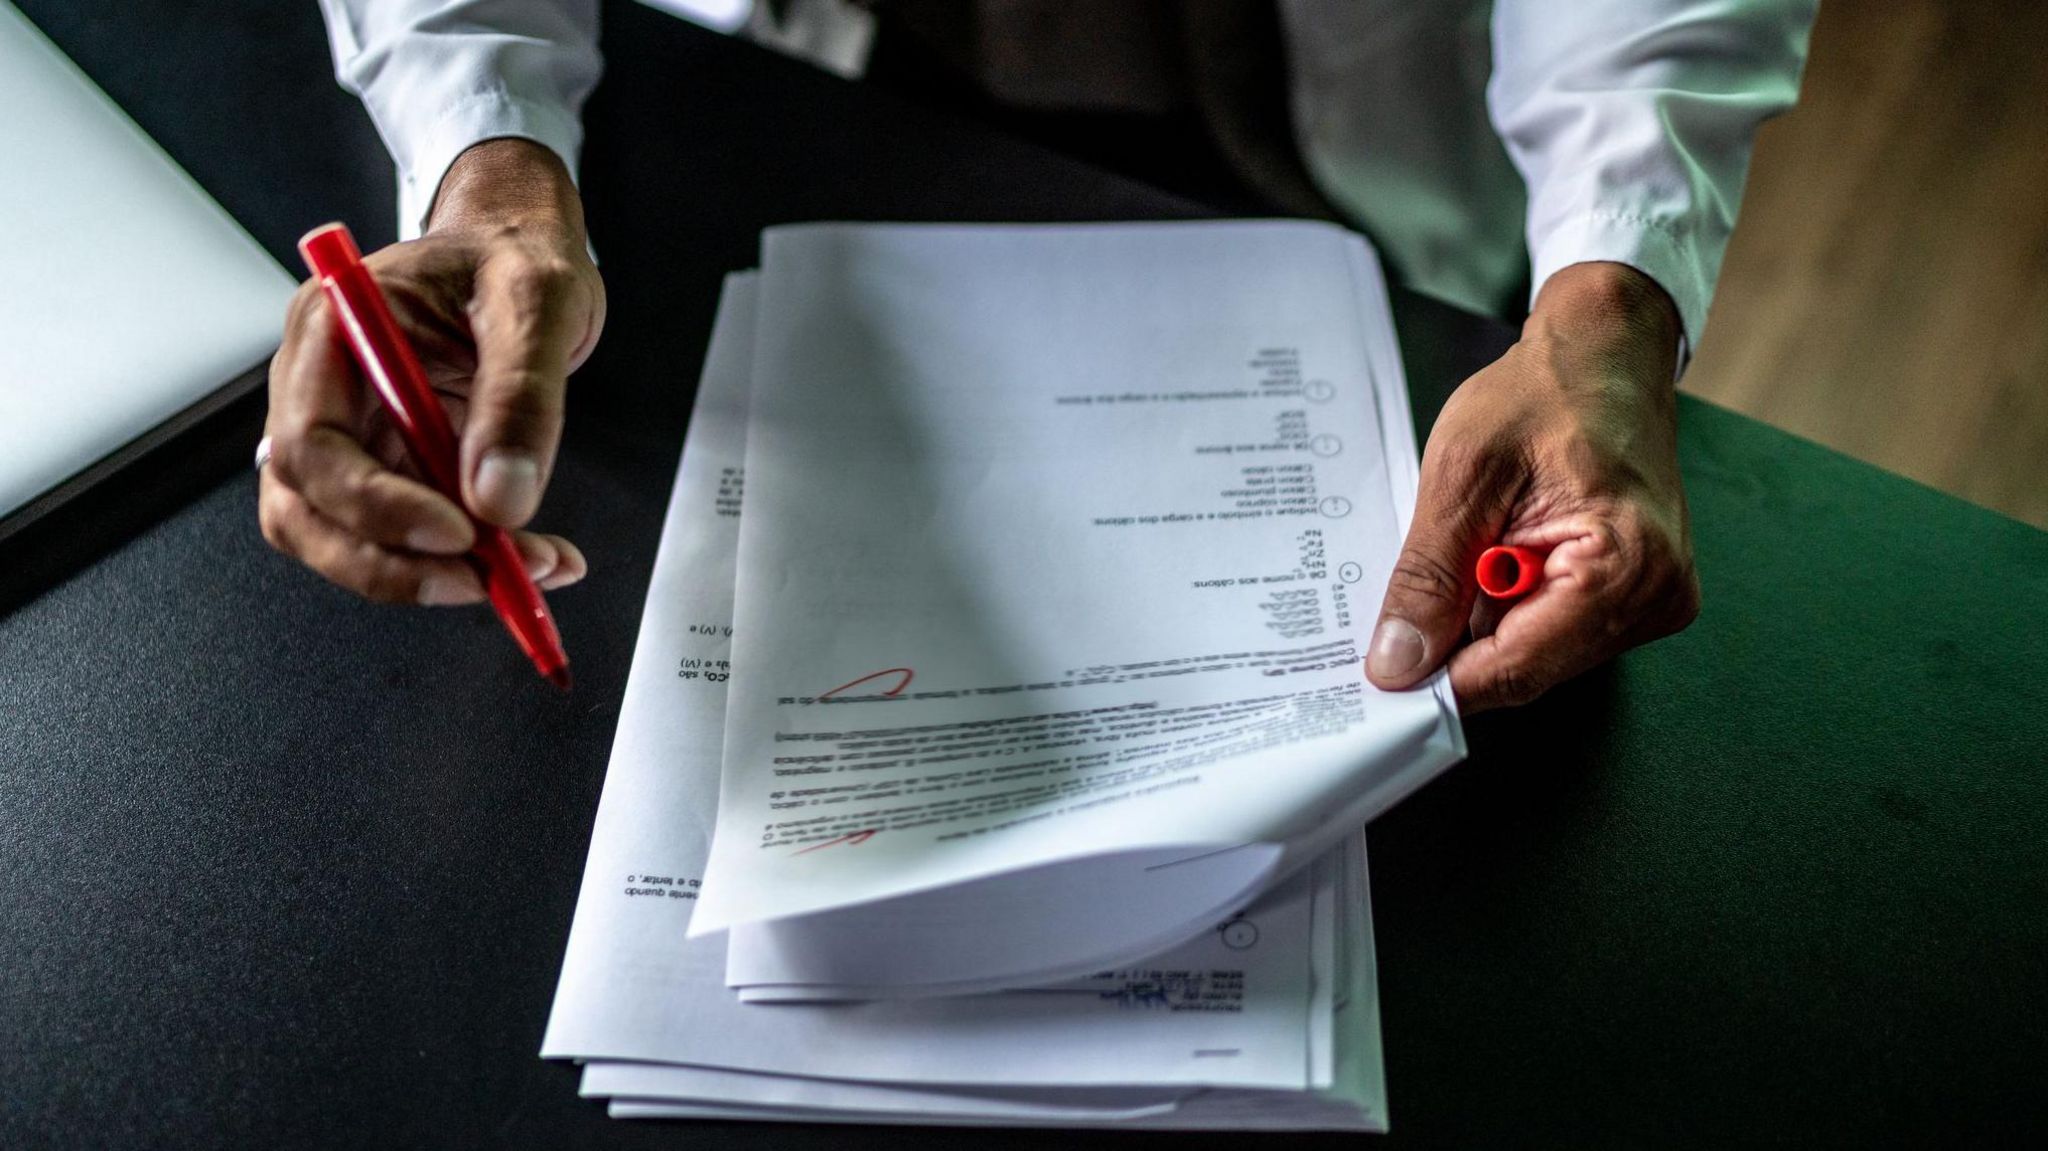 male hands holding white A4 paper with words printed on it. He has a red pen in one hand. There are some red markings on the page.